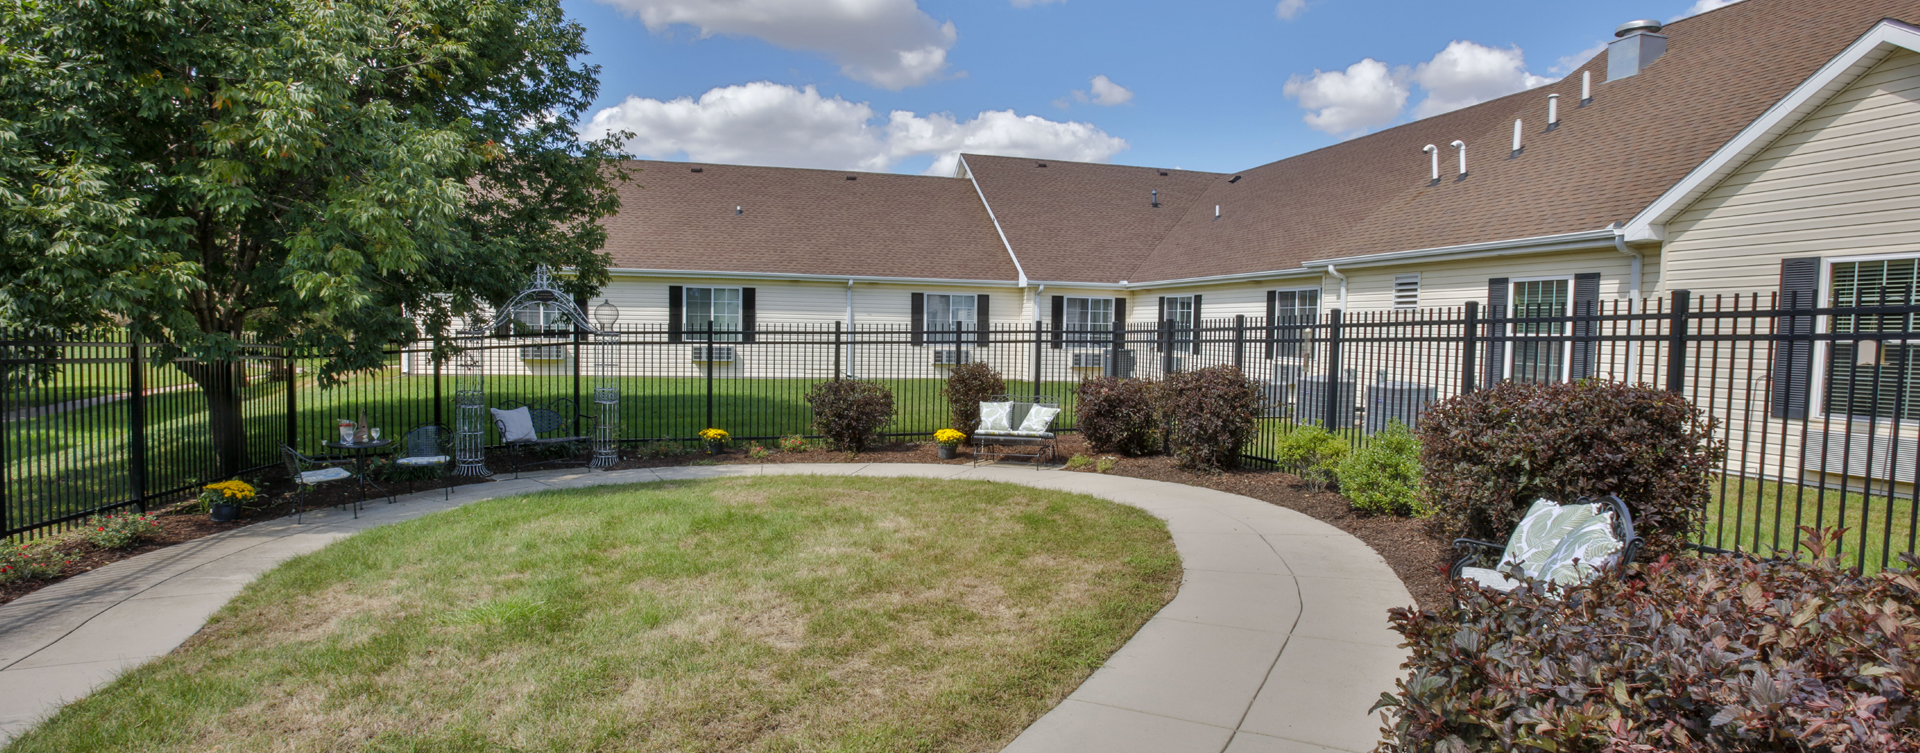 A single entrance courtyard gives residents with dementia the opportunity to be safe outside at Bickford of Champaign